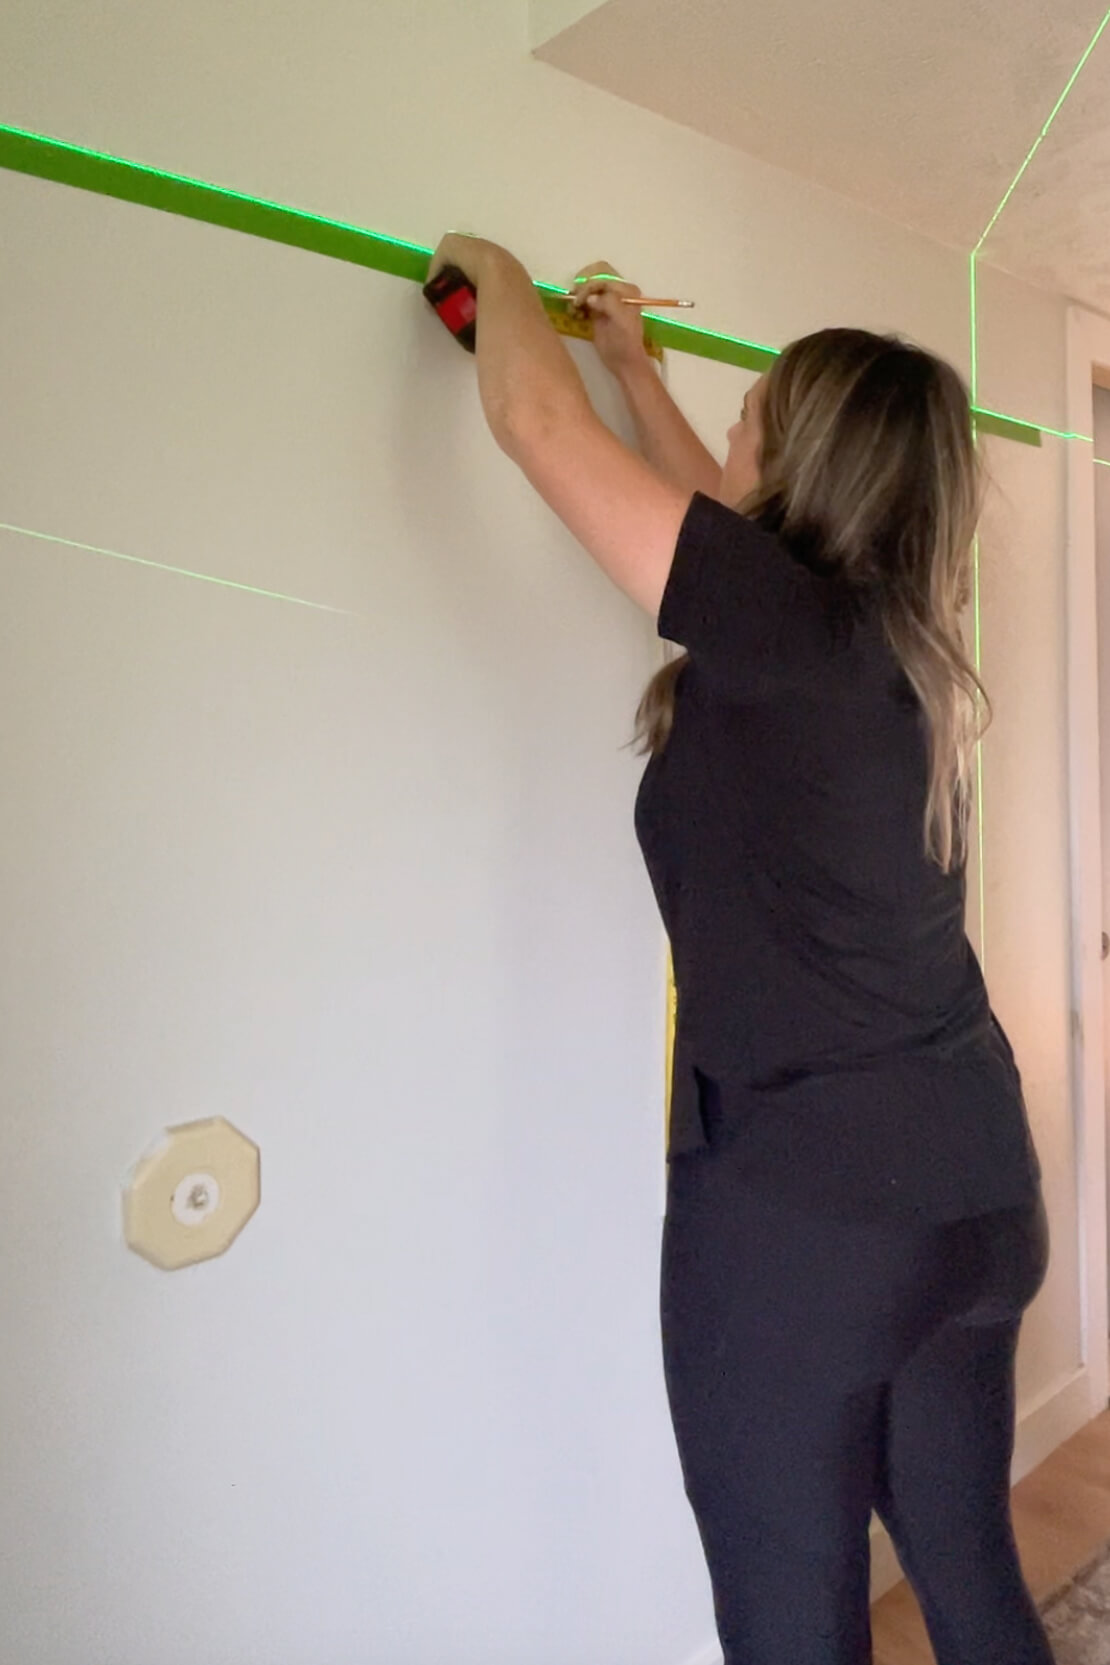 Measuring for center of wall to hang a gallery wall.